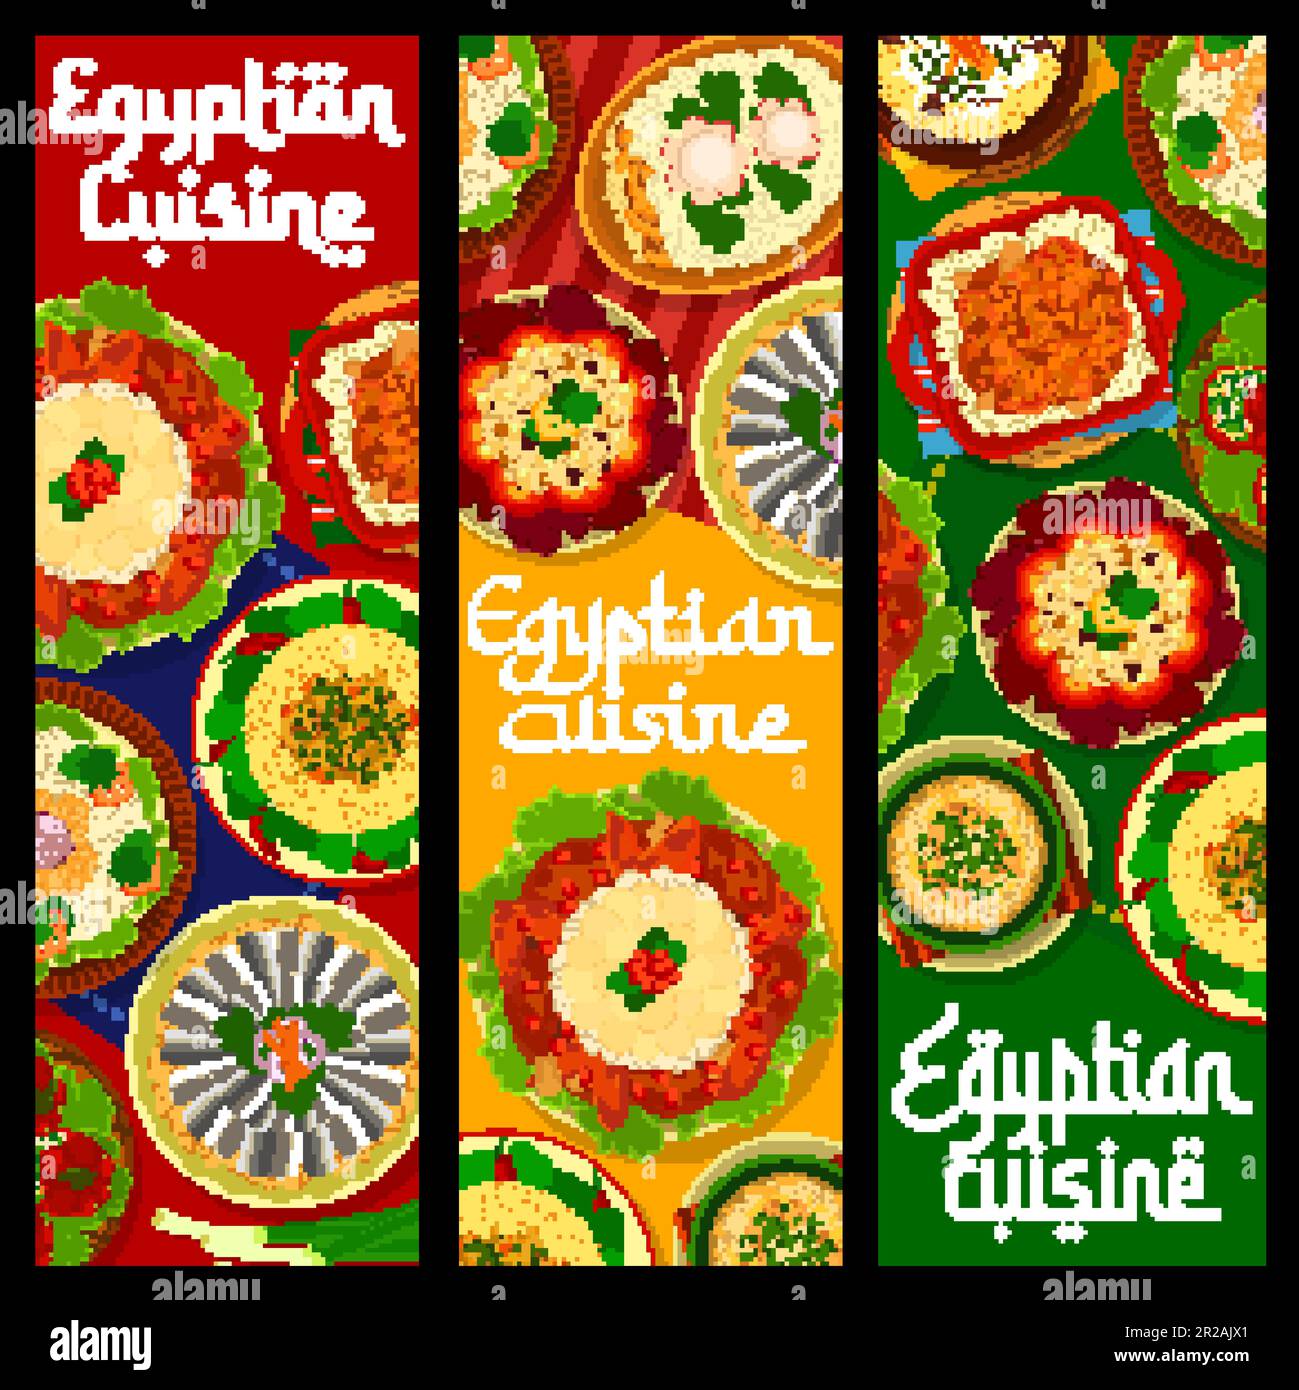 Egyptian cuisine restaurant meals banners, food dishes of Egypt restaurant, vector. Egyptian cuisine traditional lunch and dishes of rice, couscous an Stock Vector